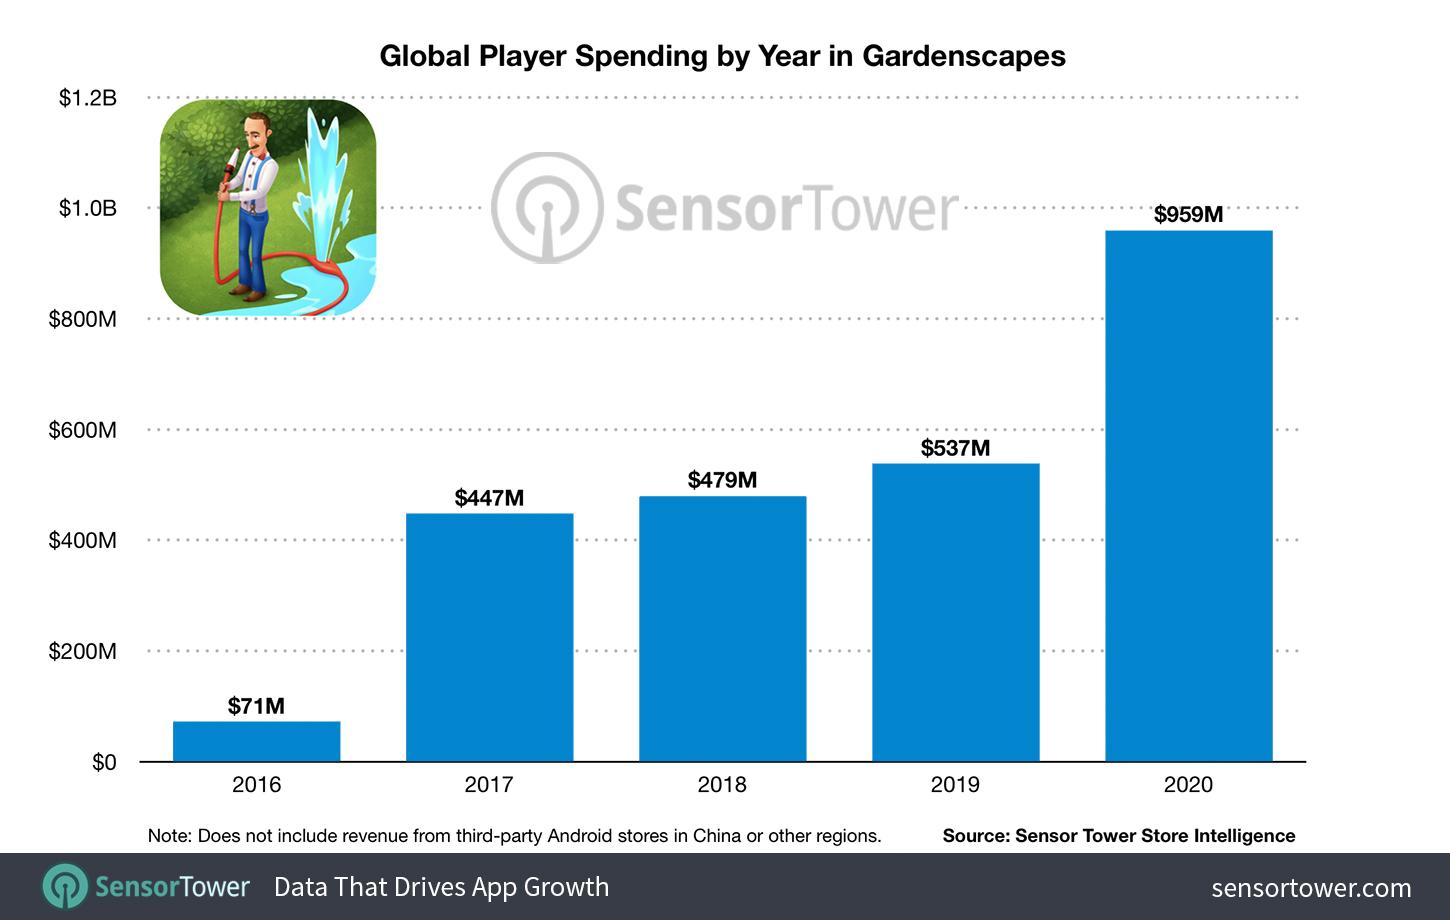 Global Player Spending by Year in Gardenscapes